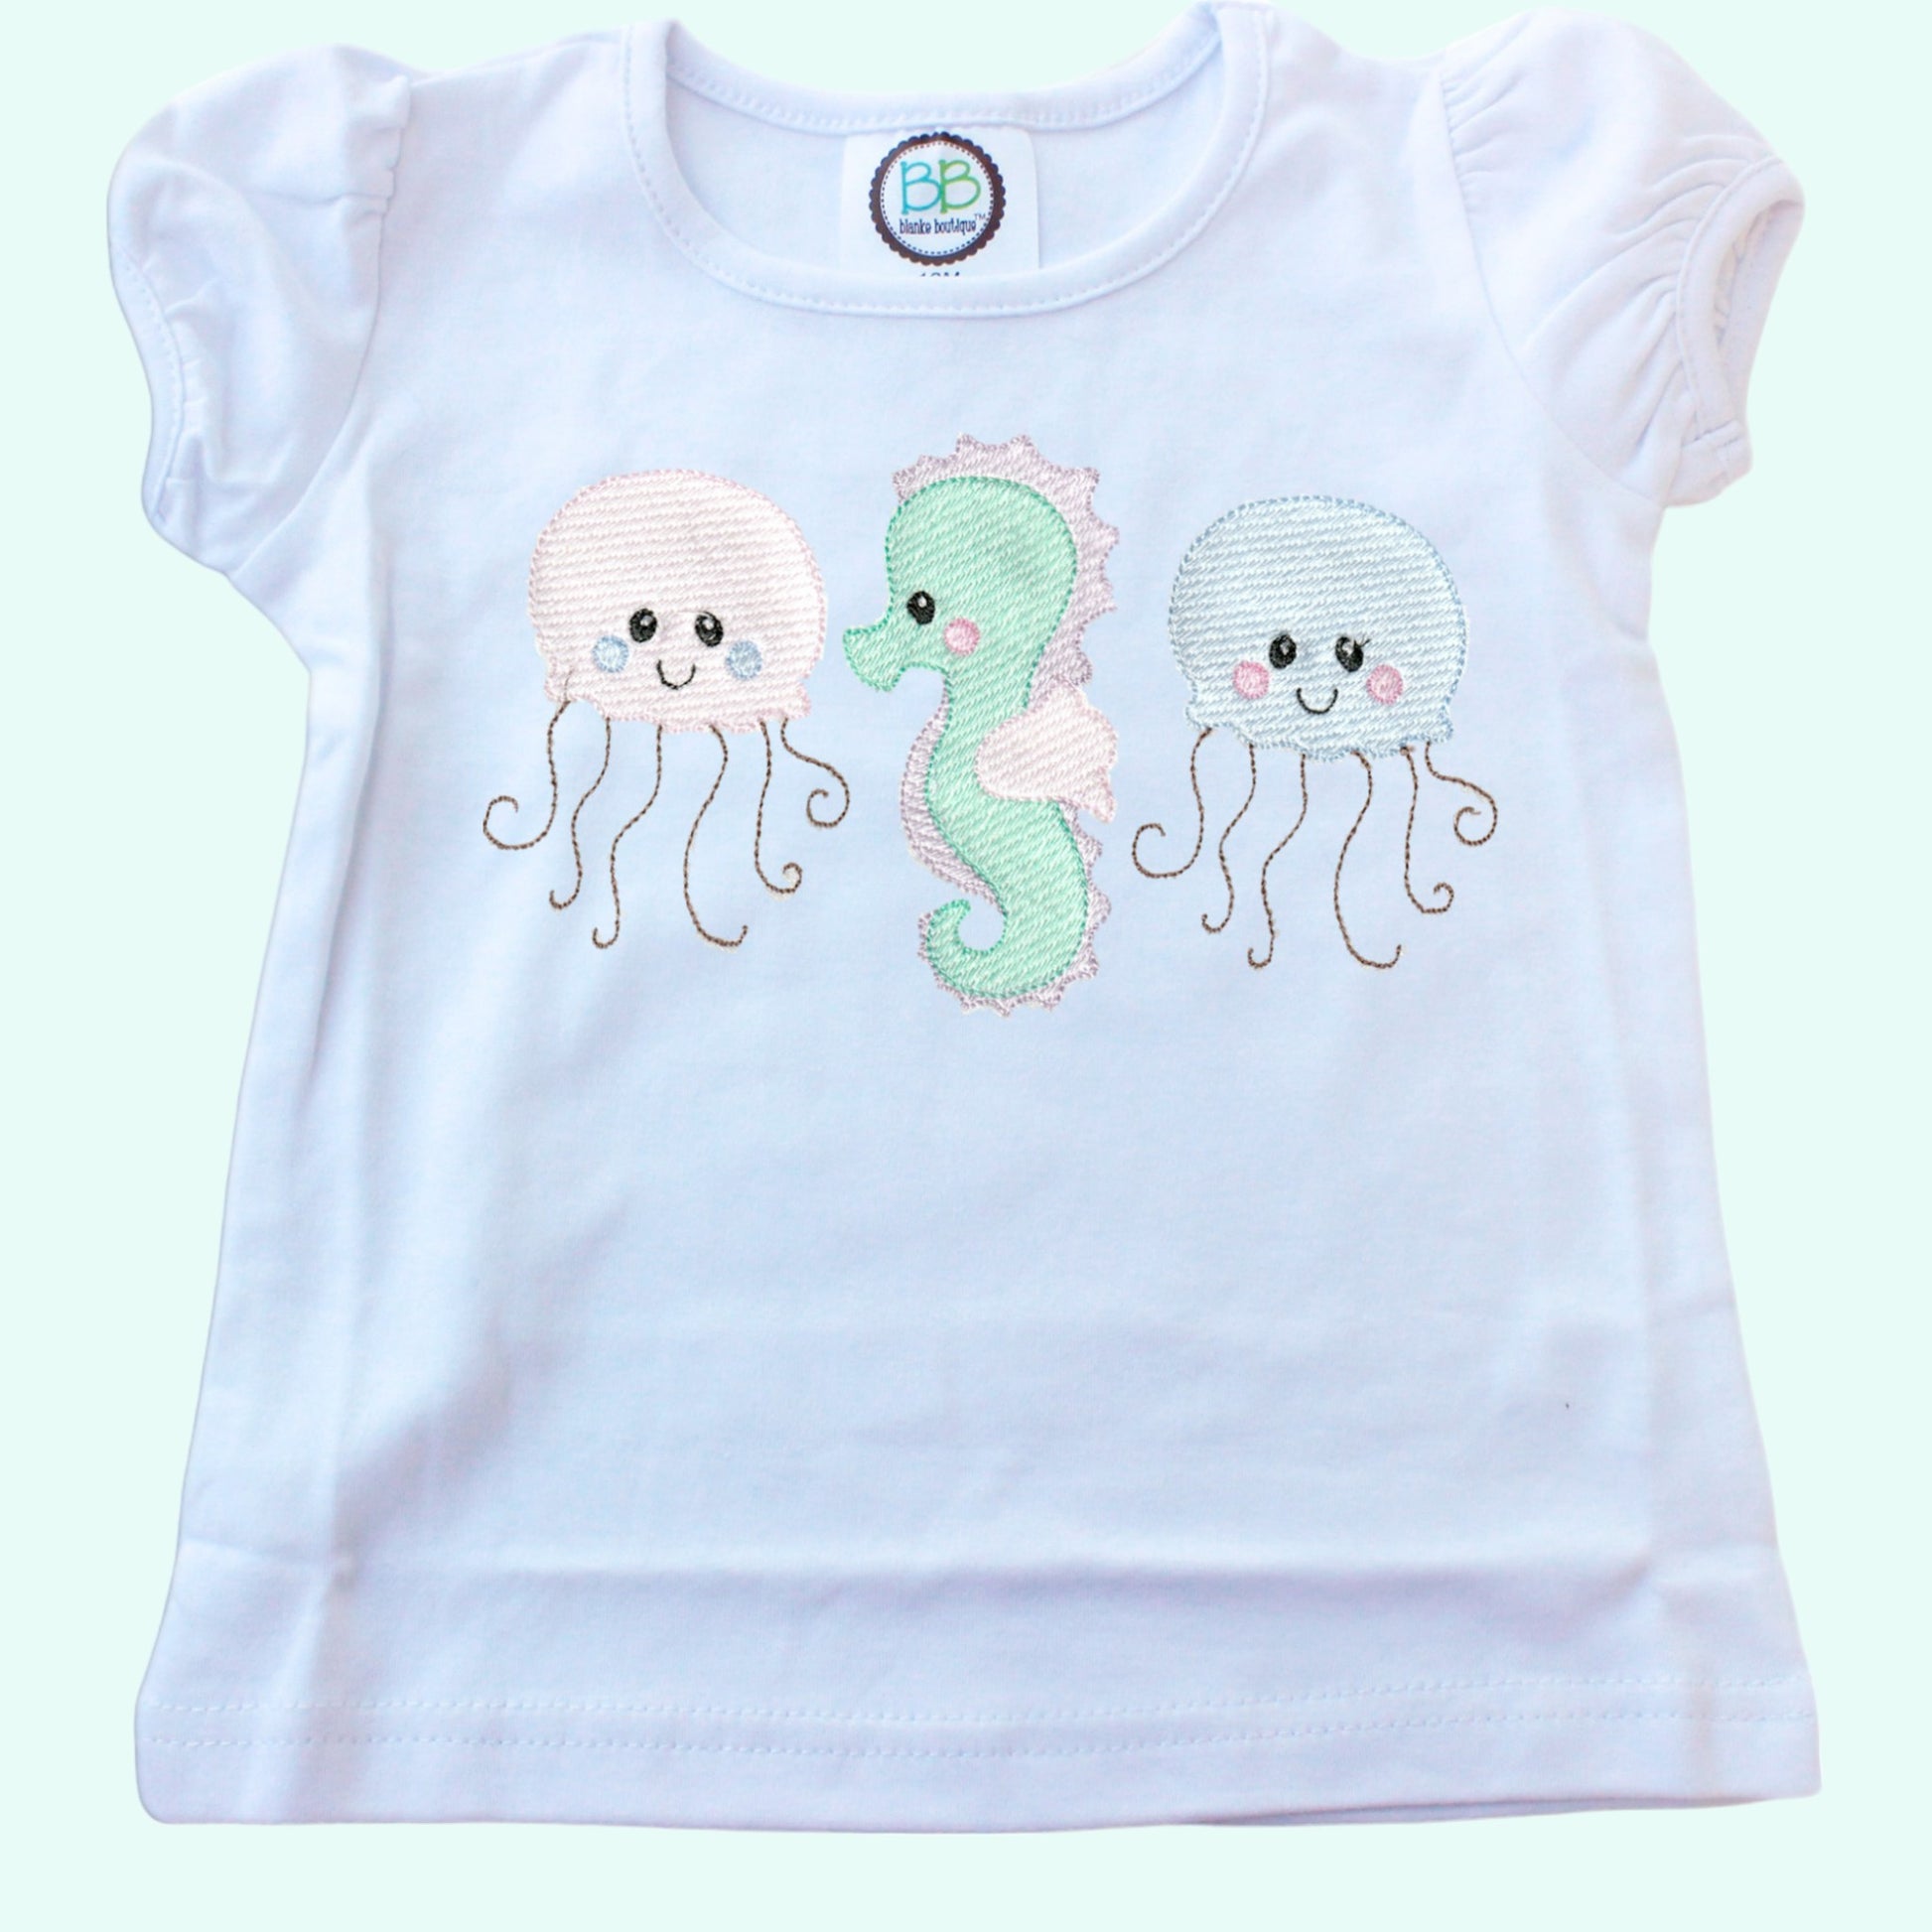 Under the Sea shirt for girls